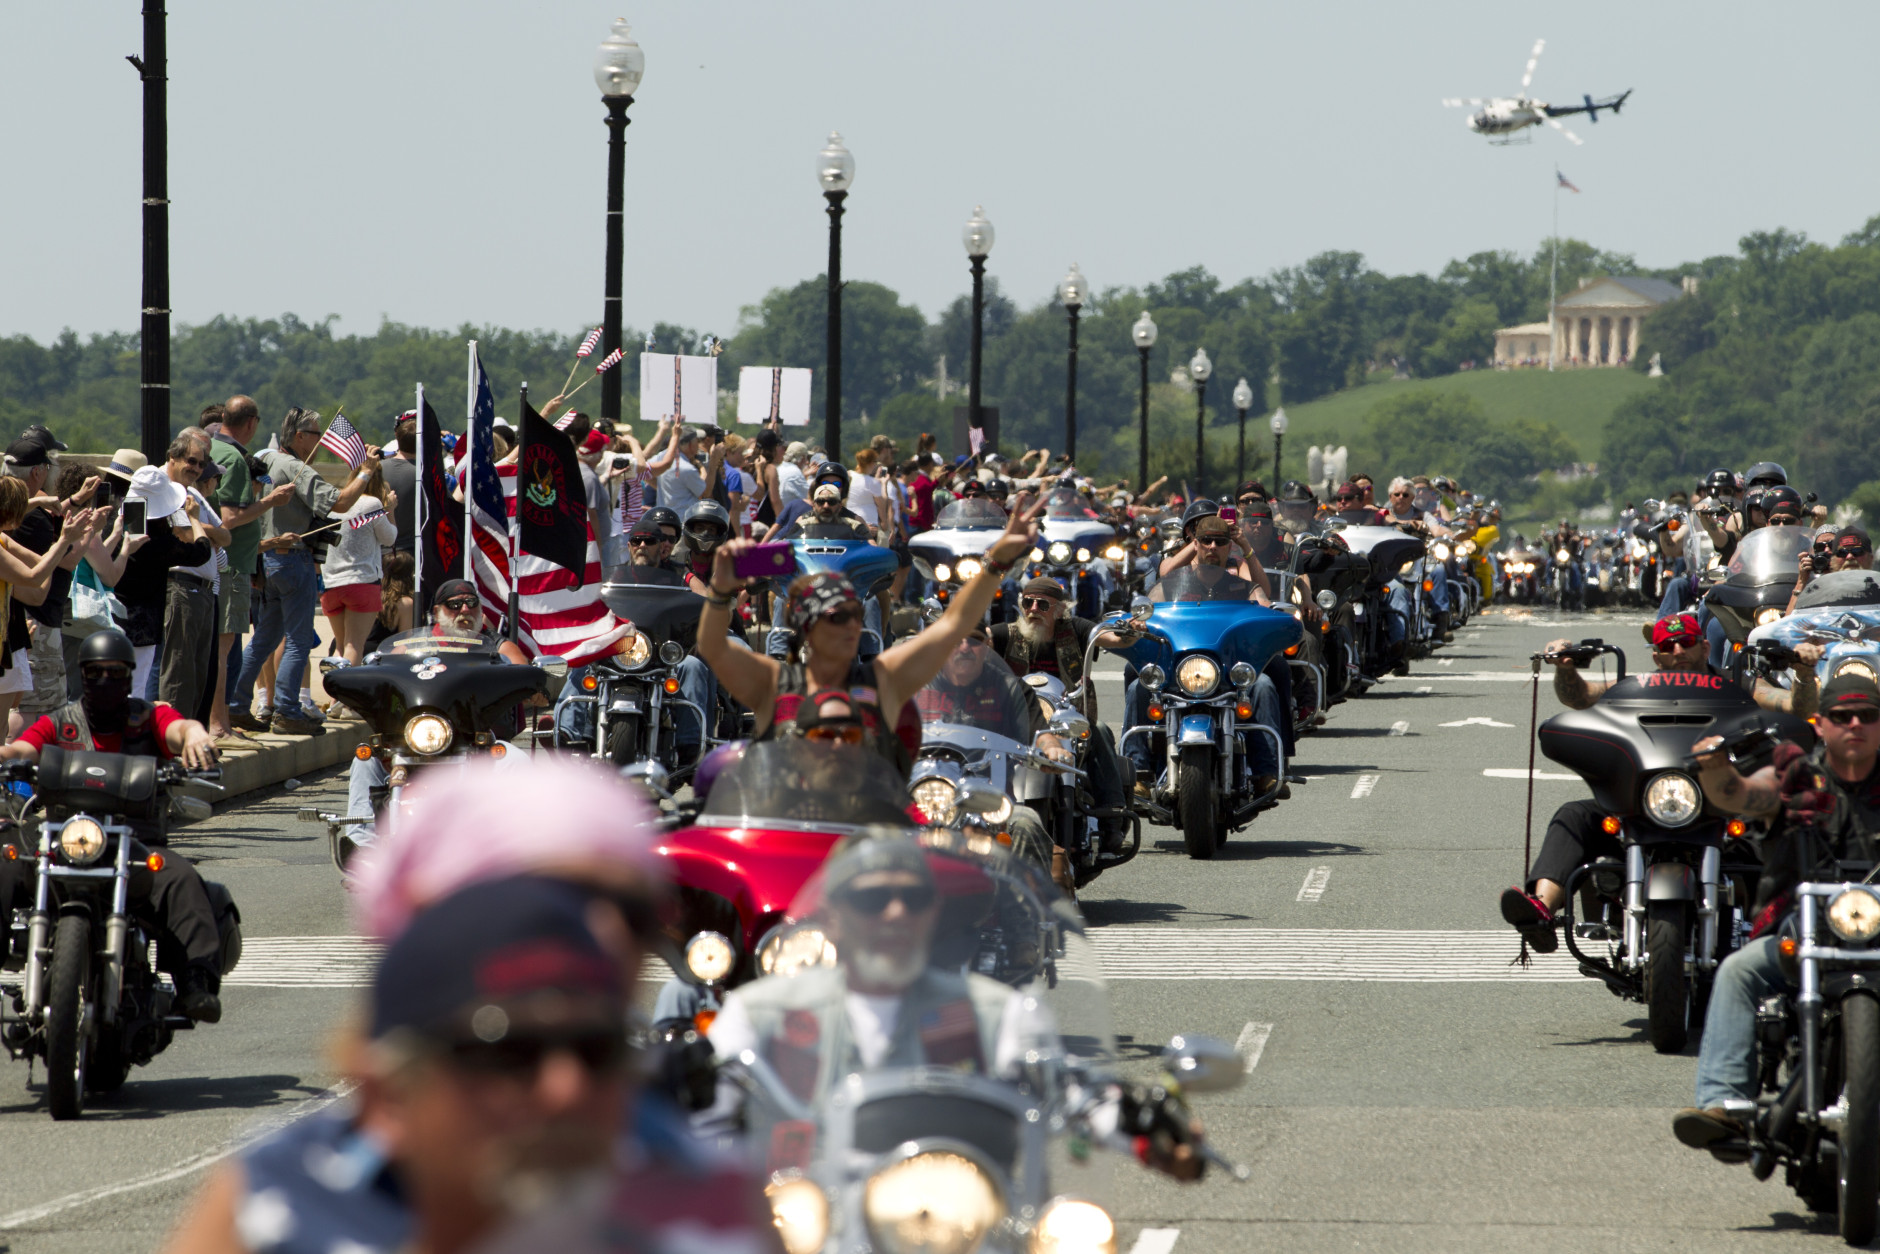 Participants in the Rolling Thunder annual motorcycle rally ride past Arlington Memorial Bridge  during the annual Rolling Thunder parade ahead of Memorial Day in Washington, Sunday, May 24, 2015.  (AP Photo/Jose Luis Magana)